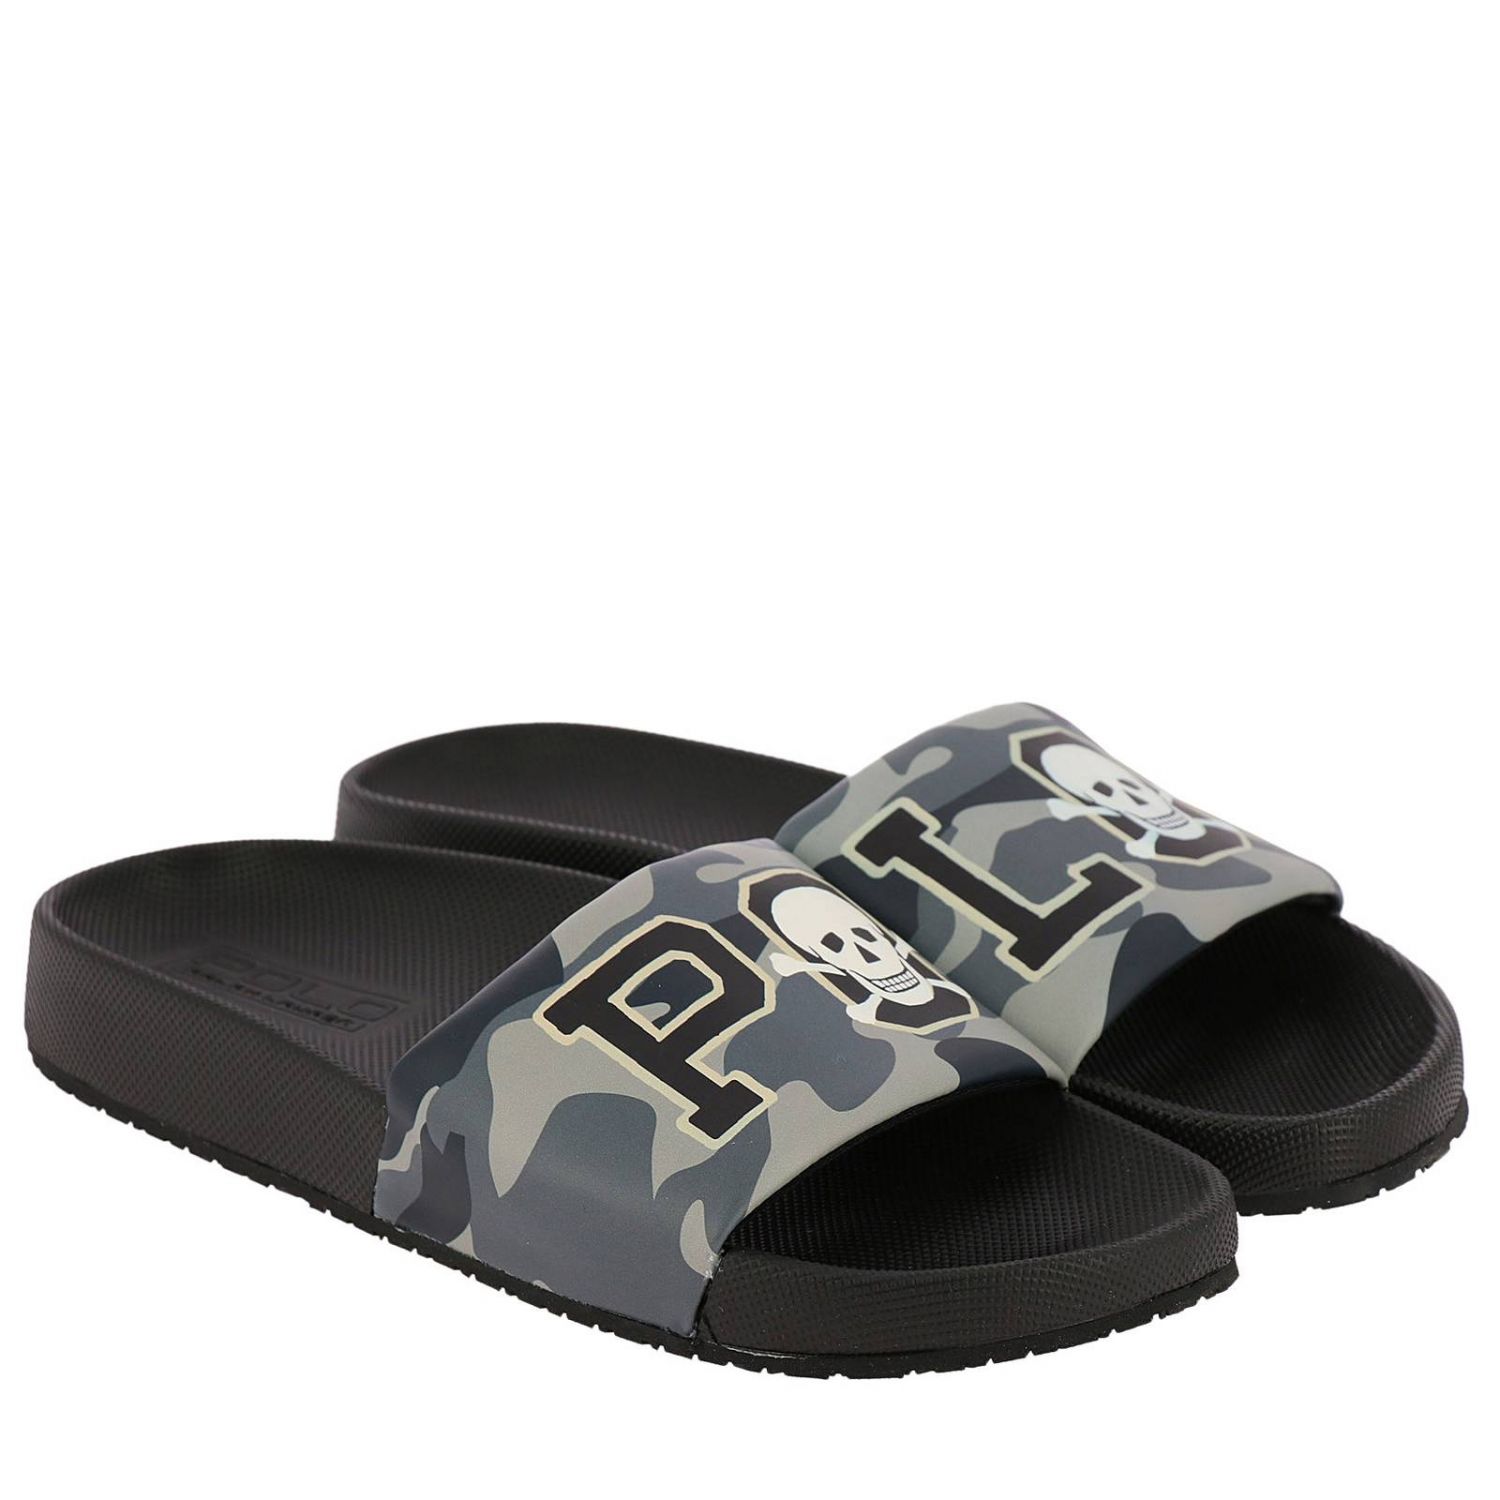 polo sandals